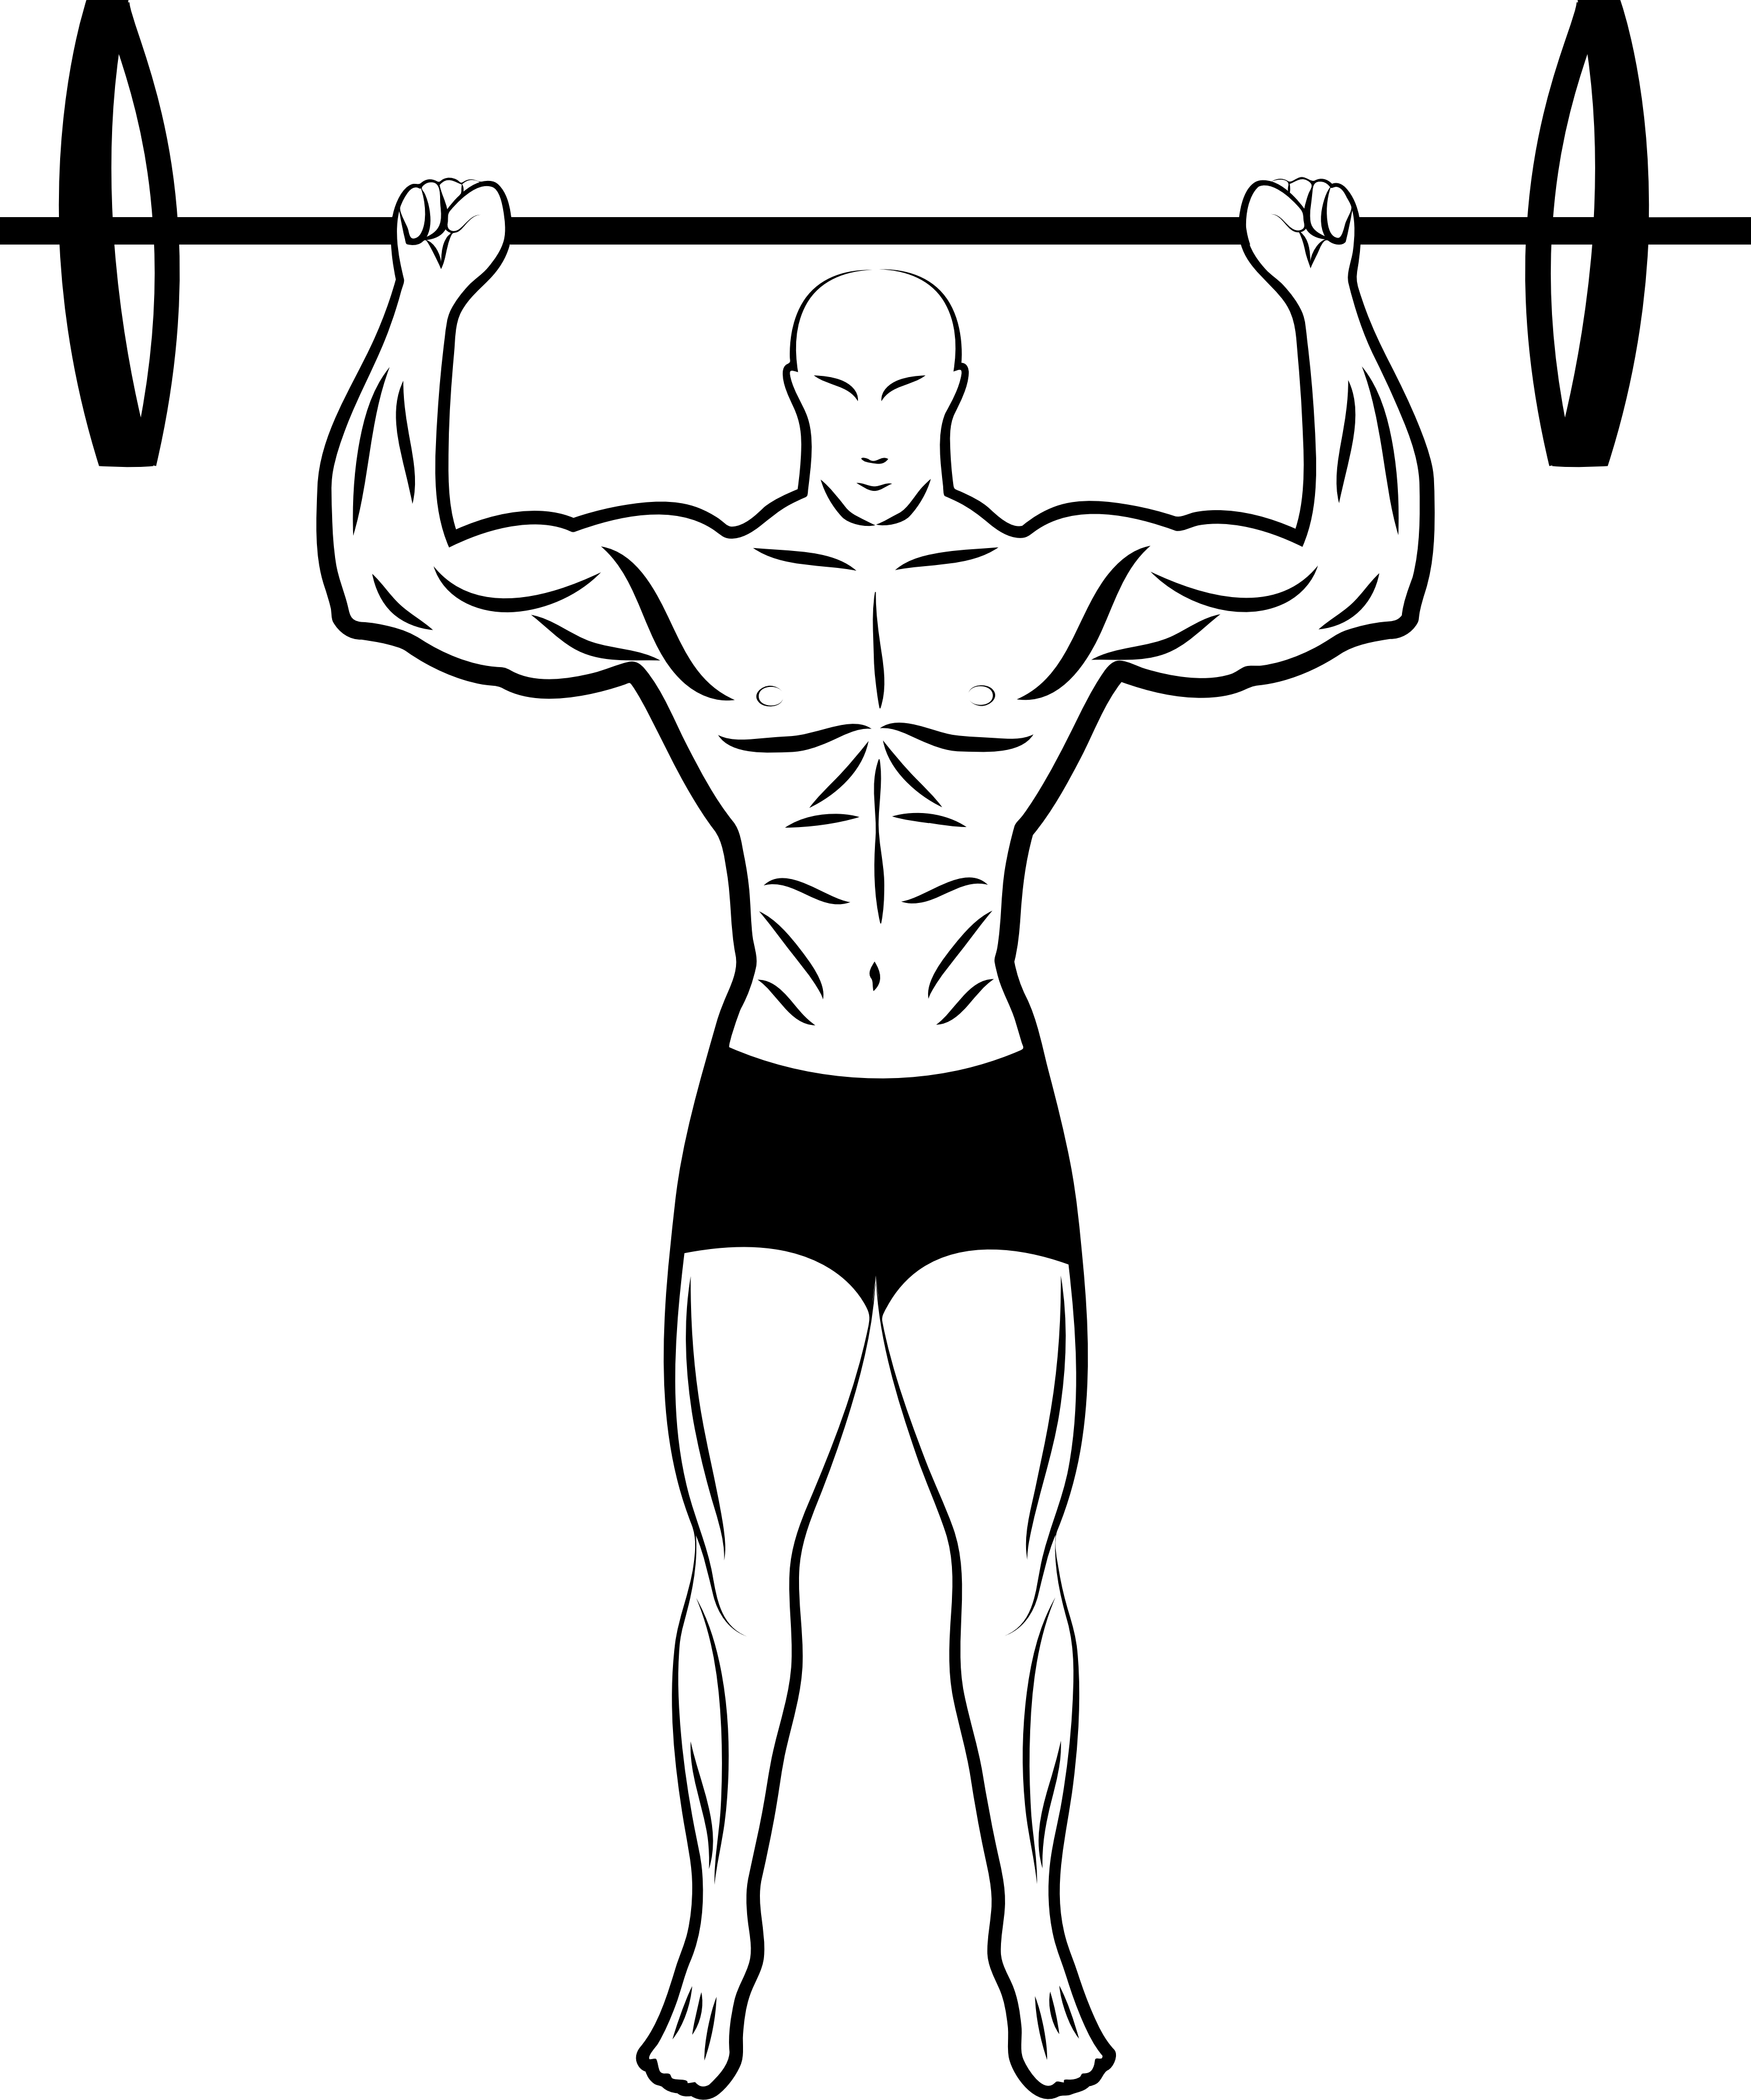 Arms clipart fitness.